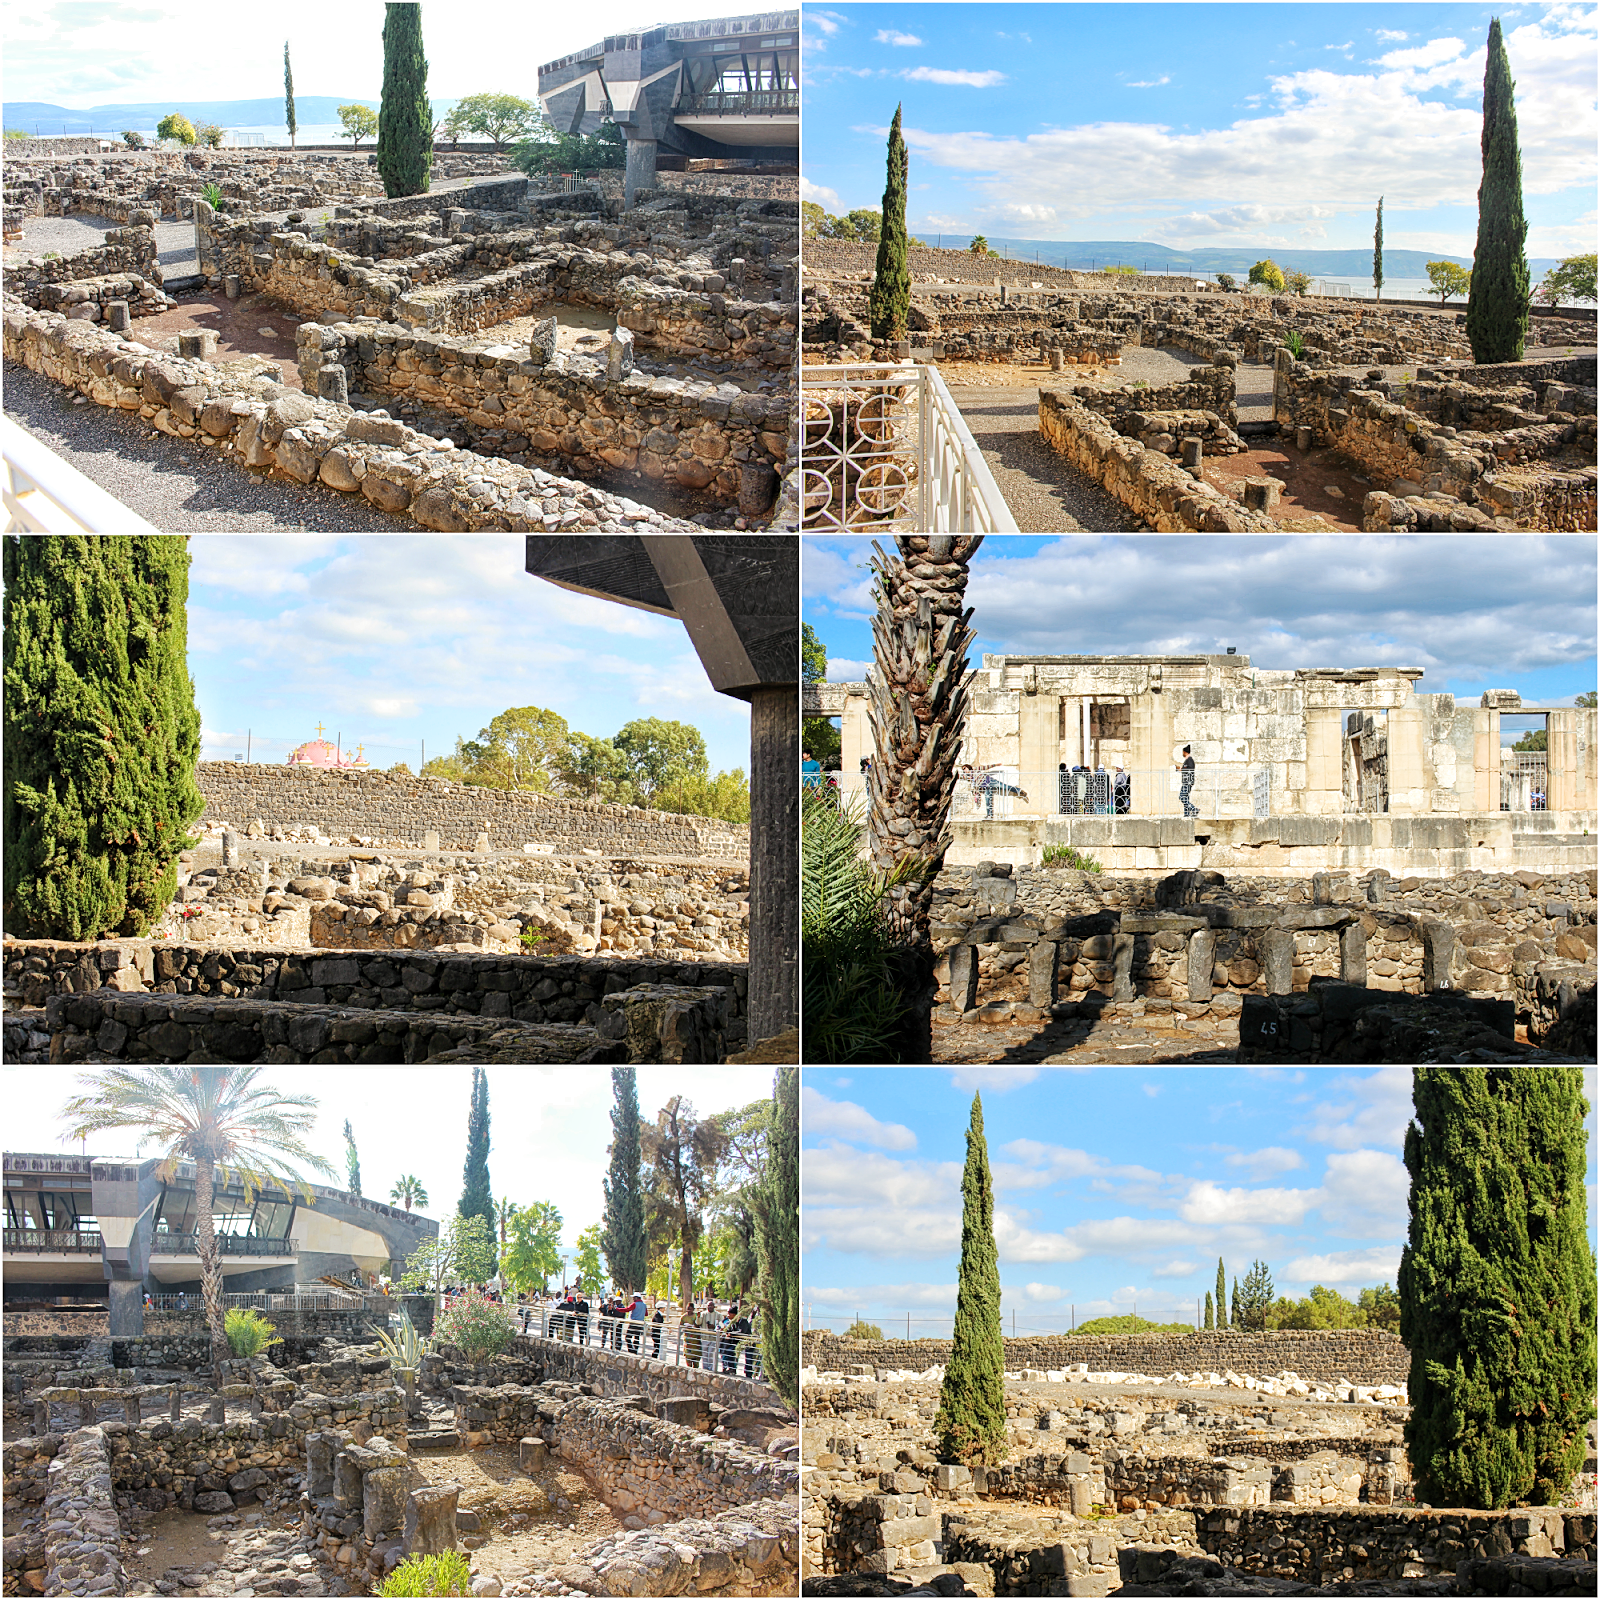 Capernaum: Things To Do in Israel